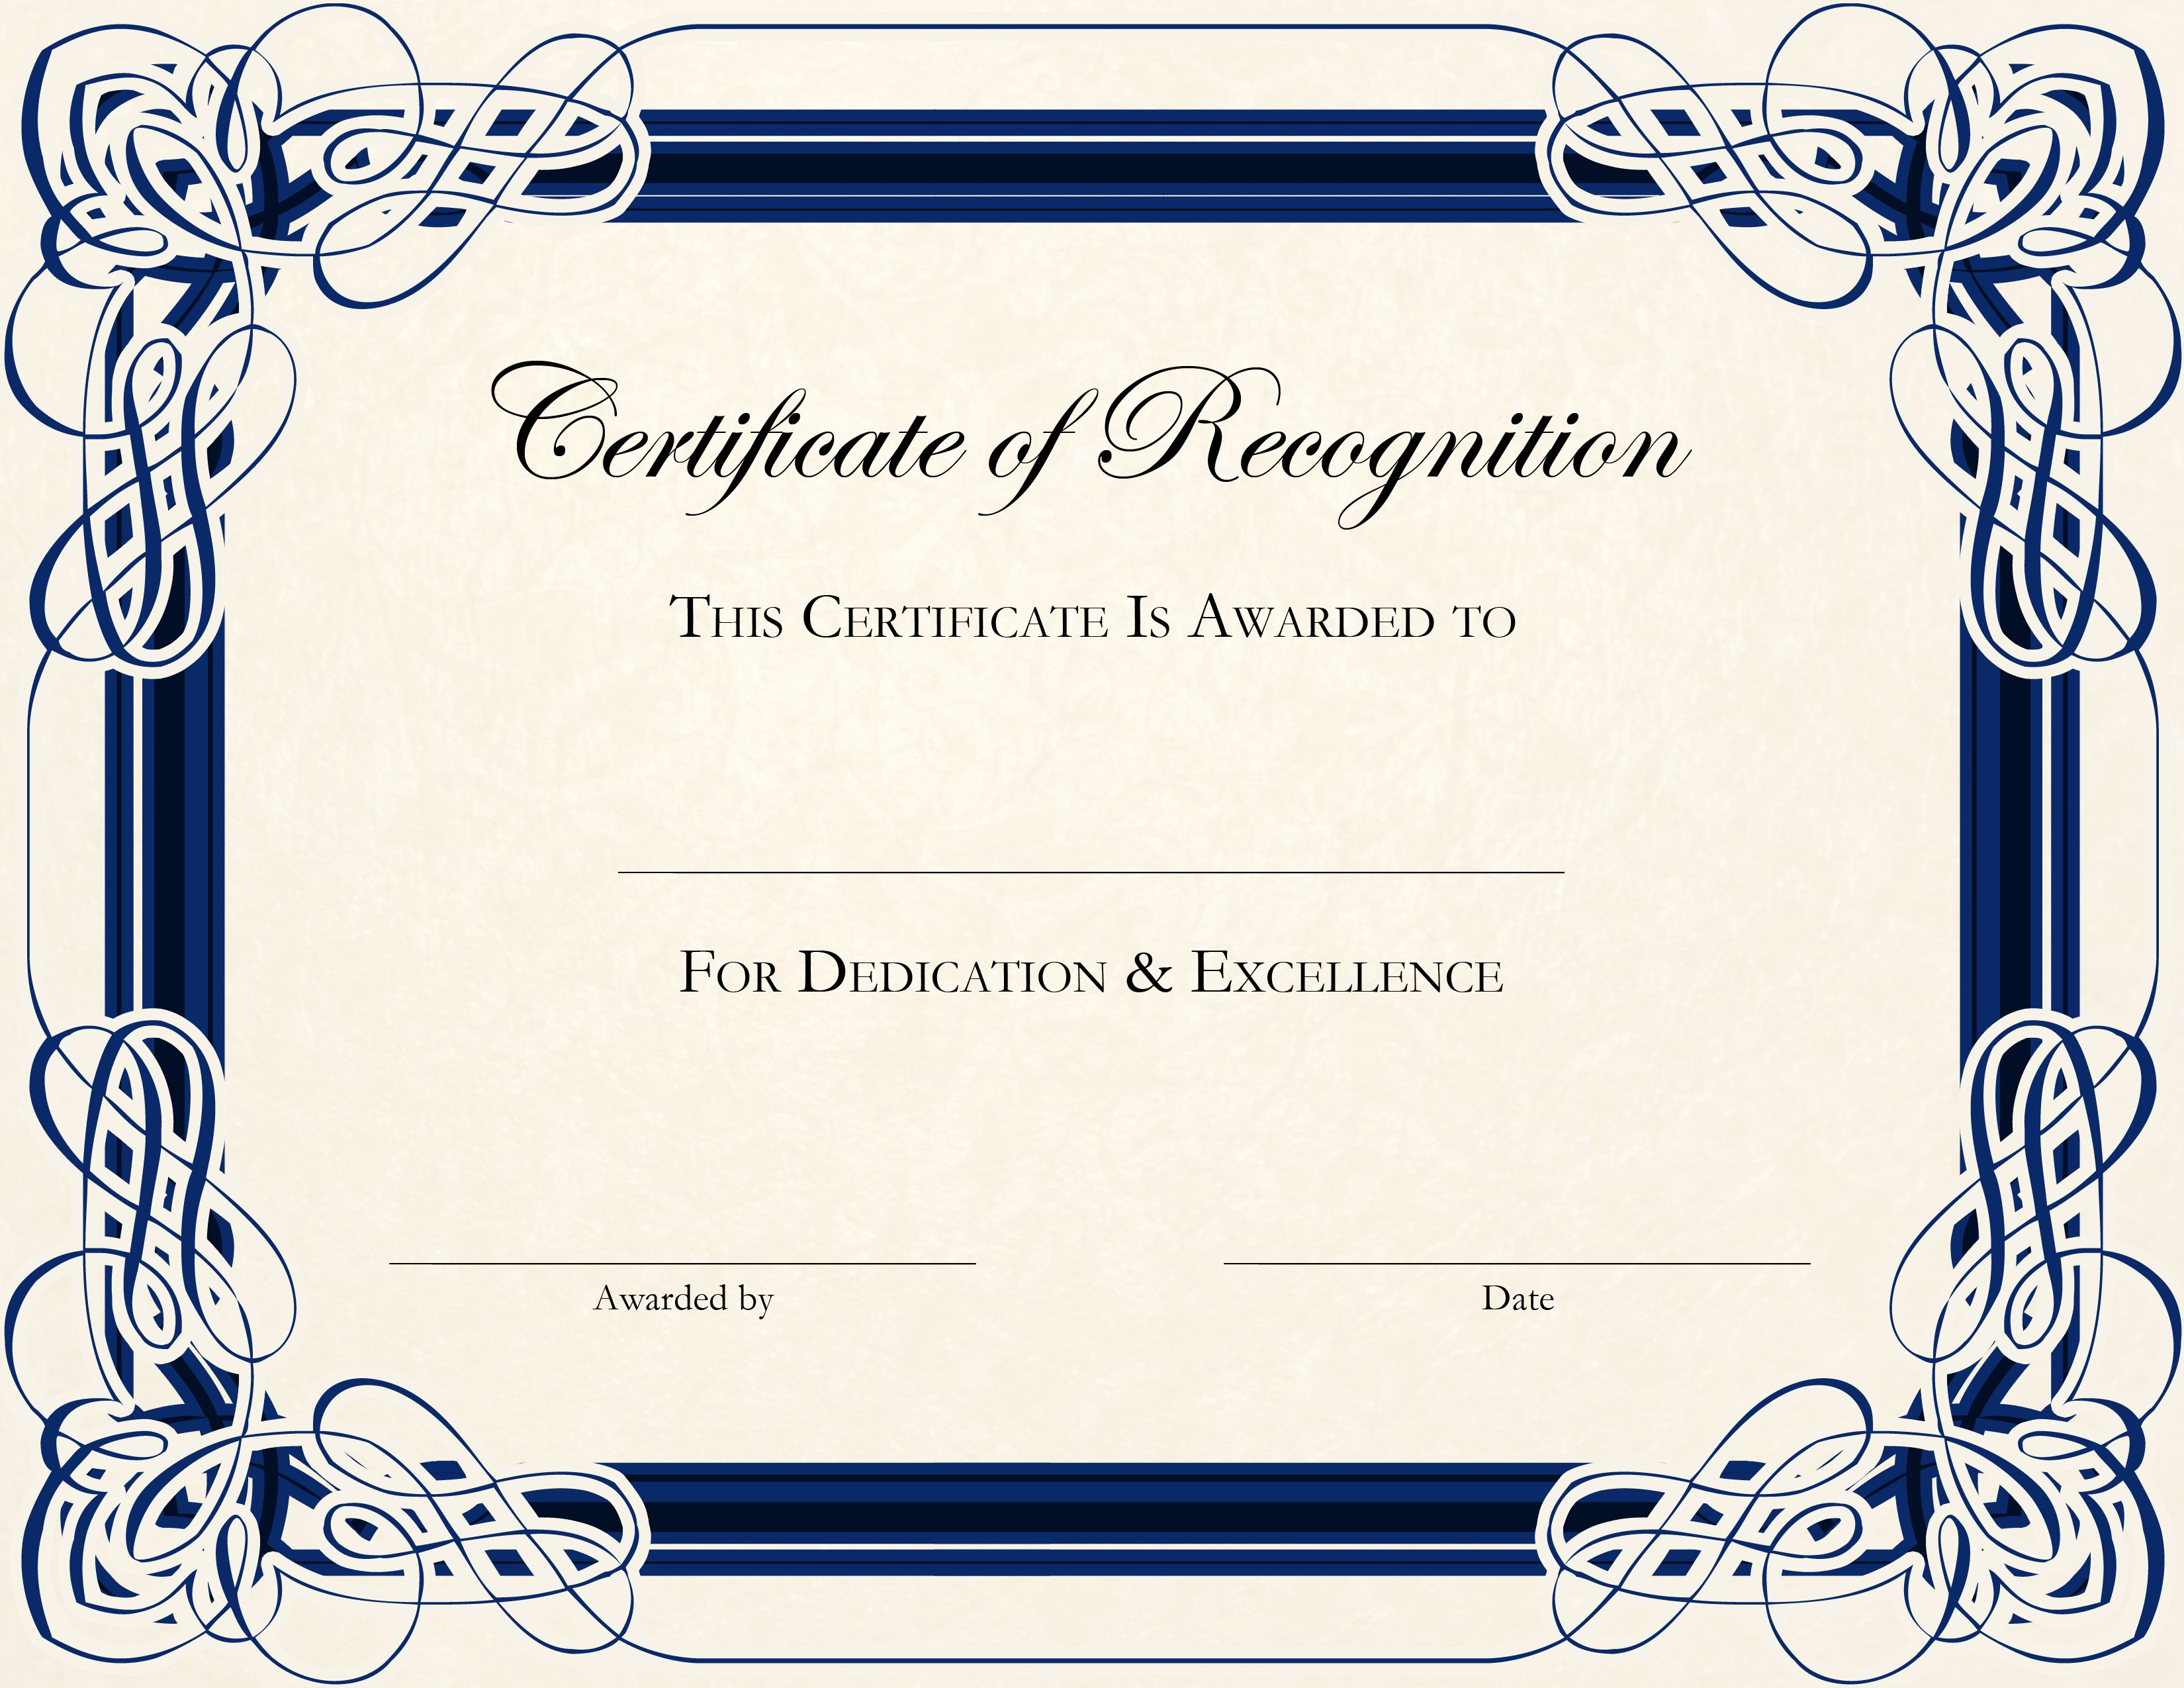 Certificate Template Designs Recognition Docs | Blankets Throughout Certificate Templates For Word Free Downloads